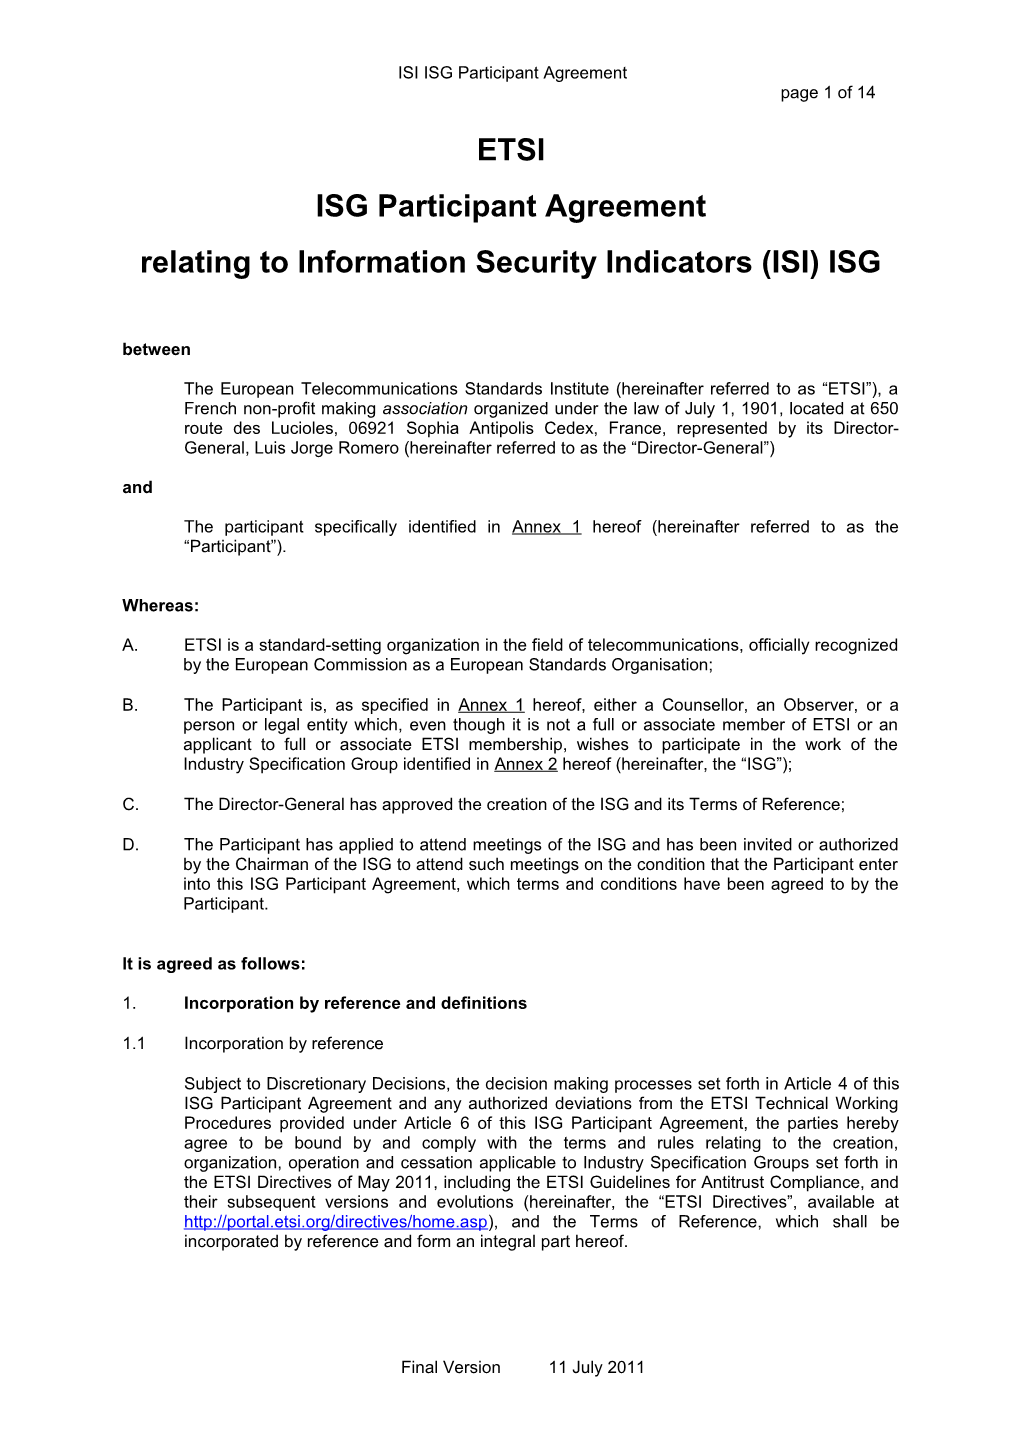 Template ISG Participant Agreement